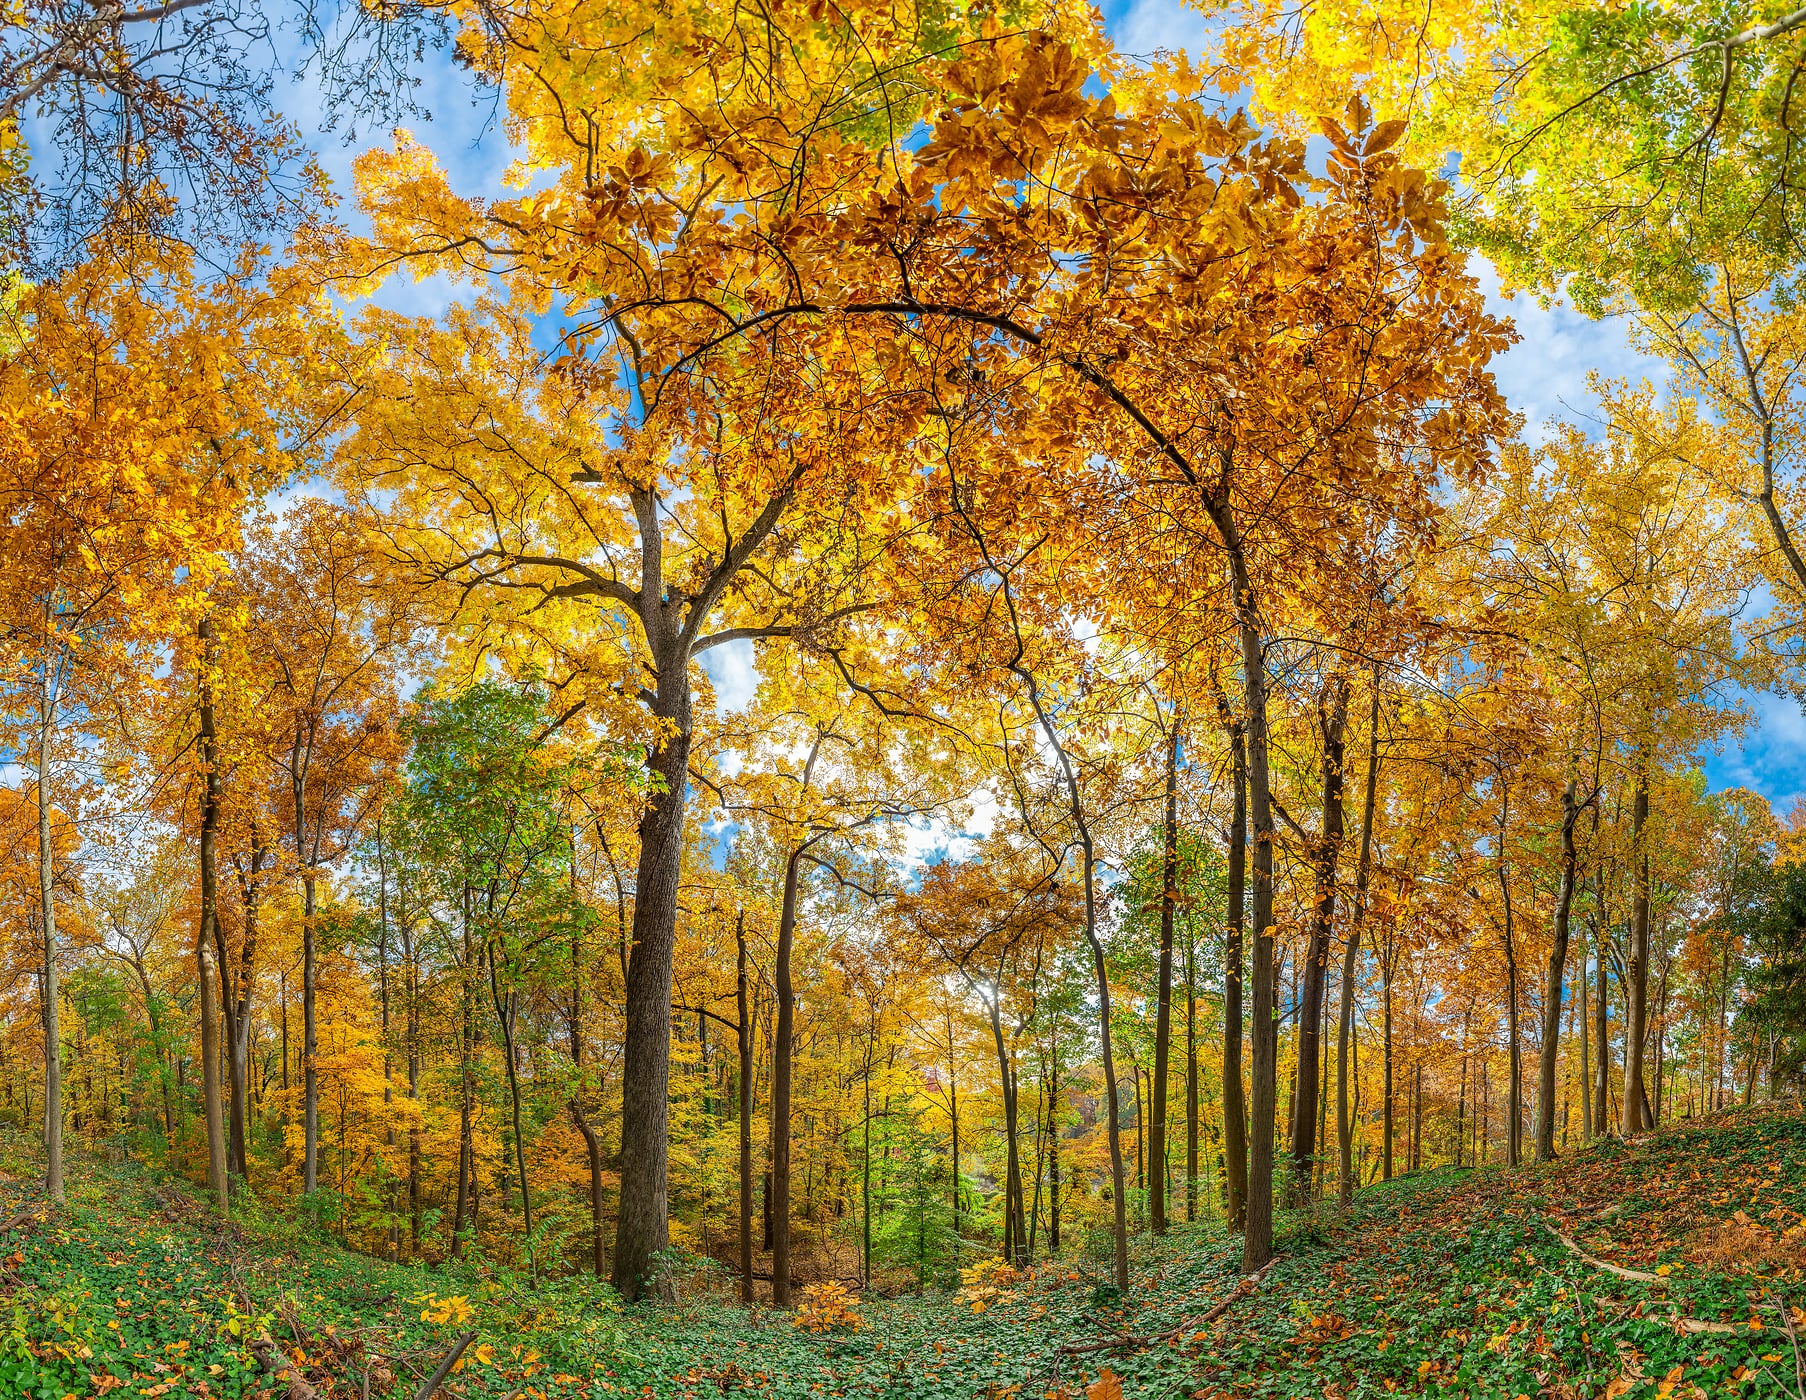 762 megapixels! A very high resolution, large-format VAST photo print of trees and fall foliage in a forest; autumn nature photograph created by Tim Lo Monaco in Arlington Forest Neighborhood, Arlington, Virginia.